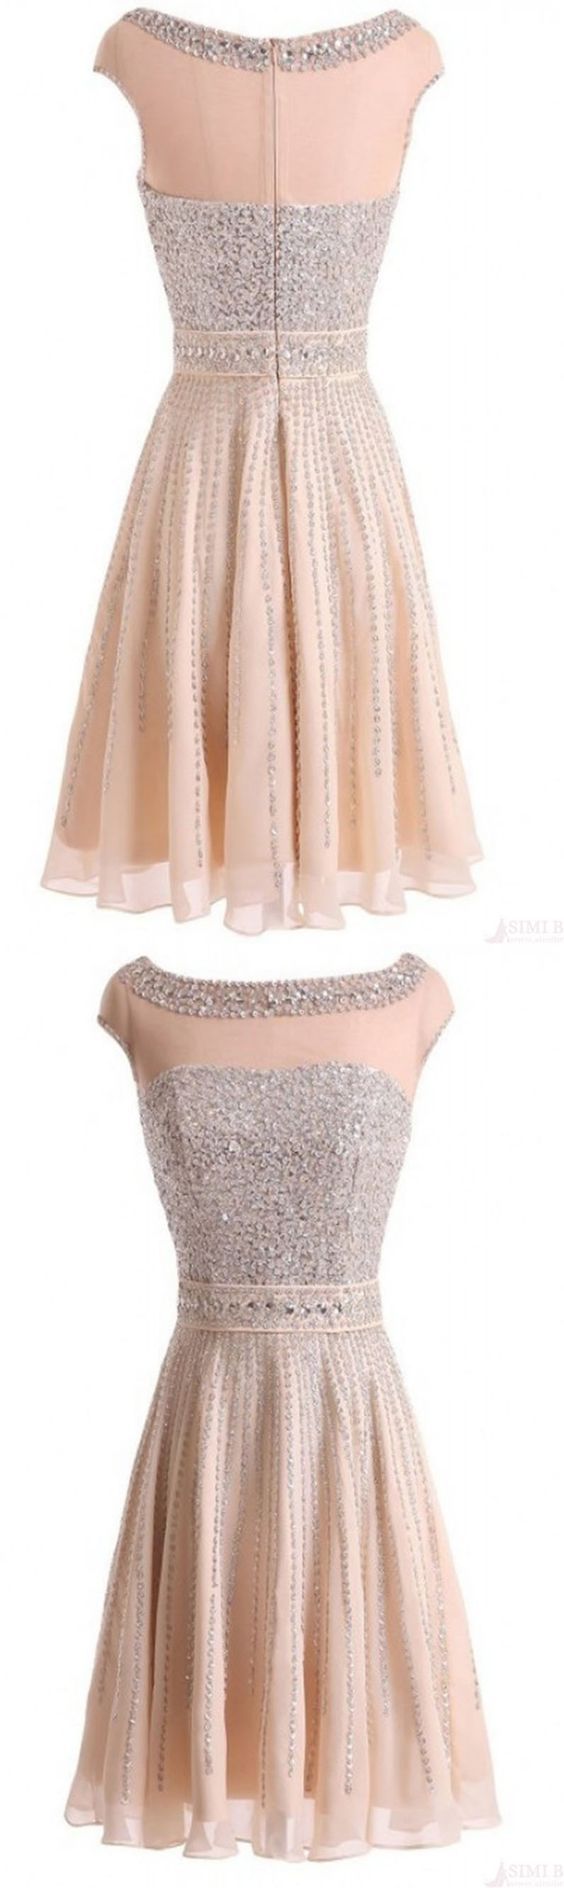 Charming Prom Dress,prom Dress, Homecoming Dress,prom Gown,short Party Dress